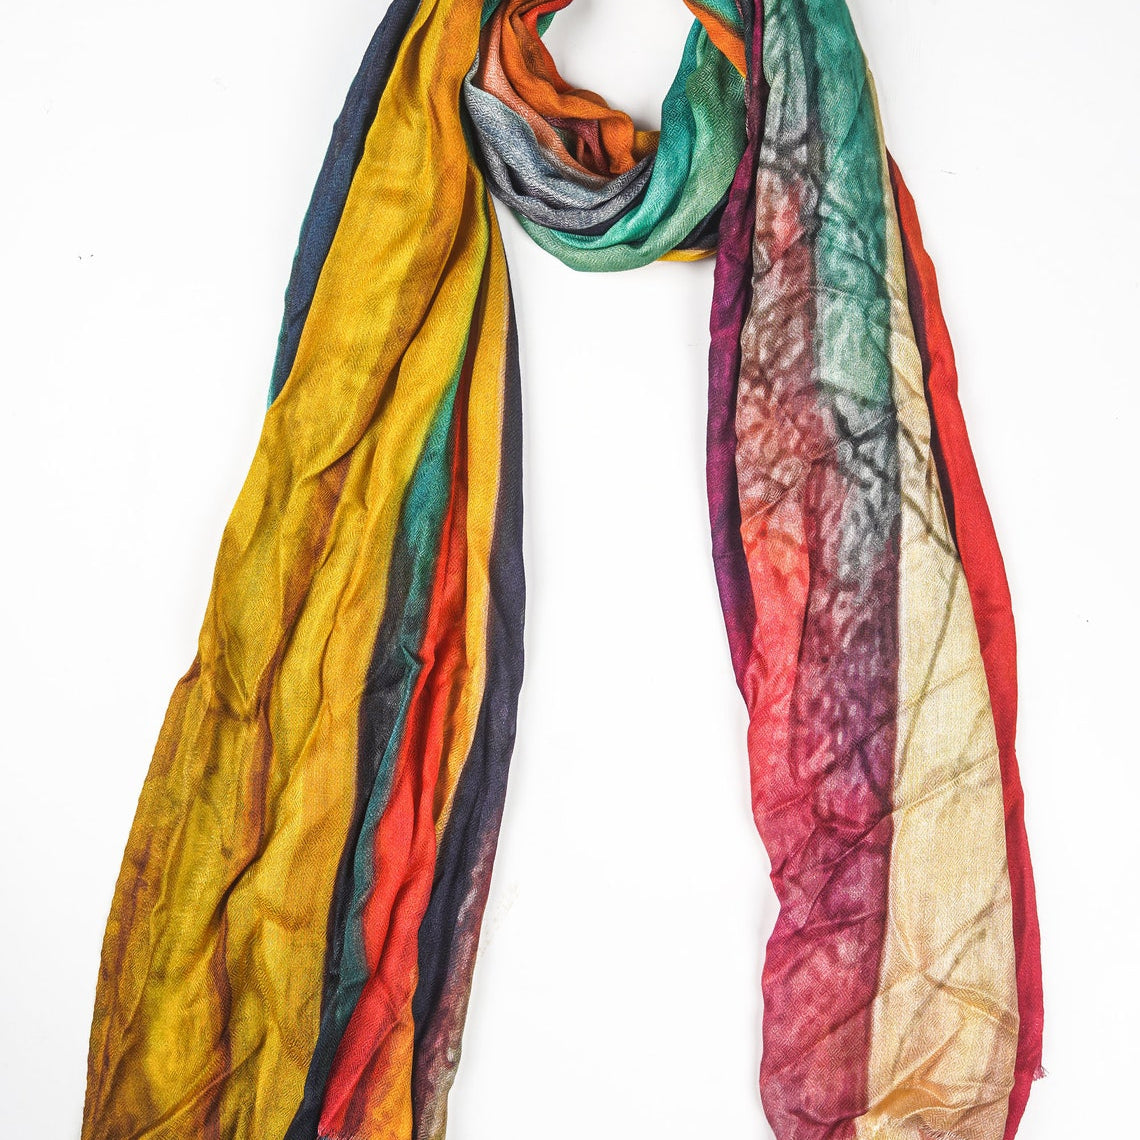 Silk Modal Scarf, long all season scarf in luxurious fabric blend, shawl and wrap, accessories for women, gifts for her, summer scarf, shawl - Rainbow